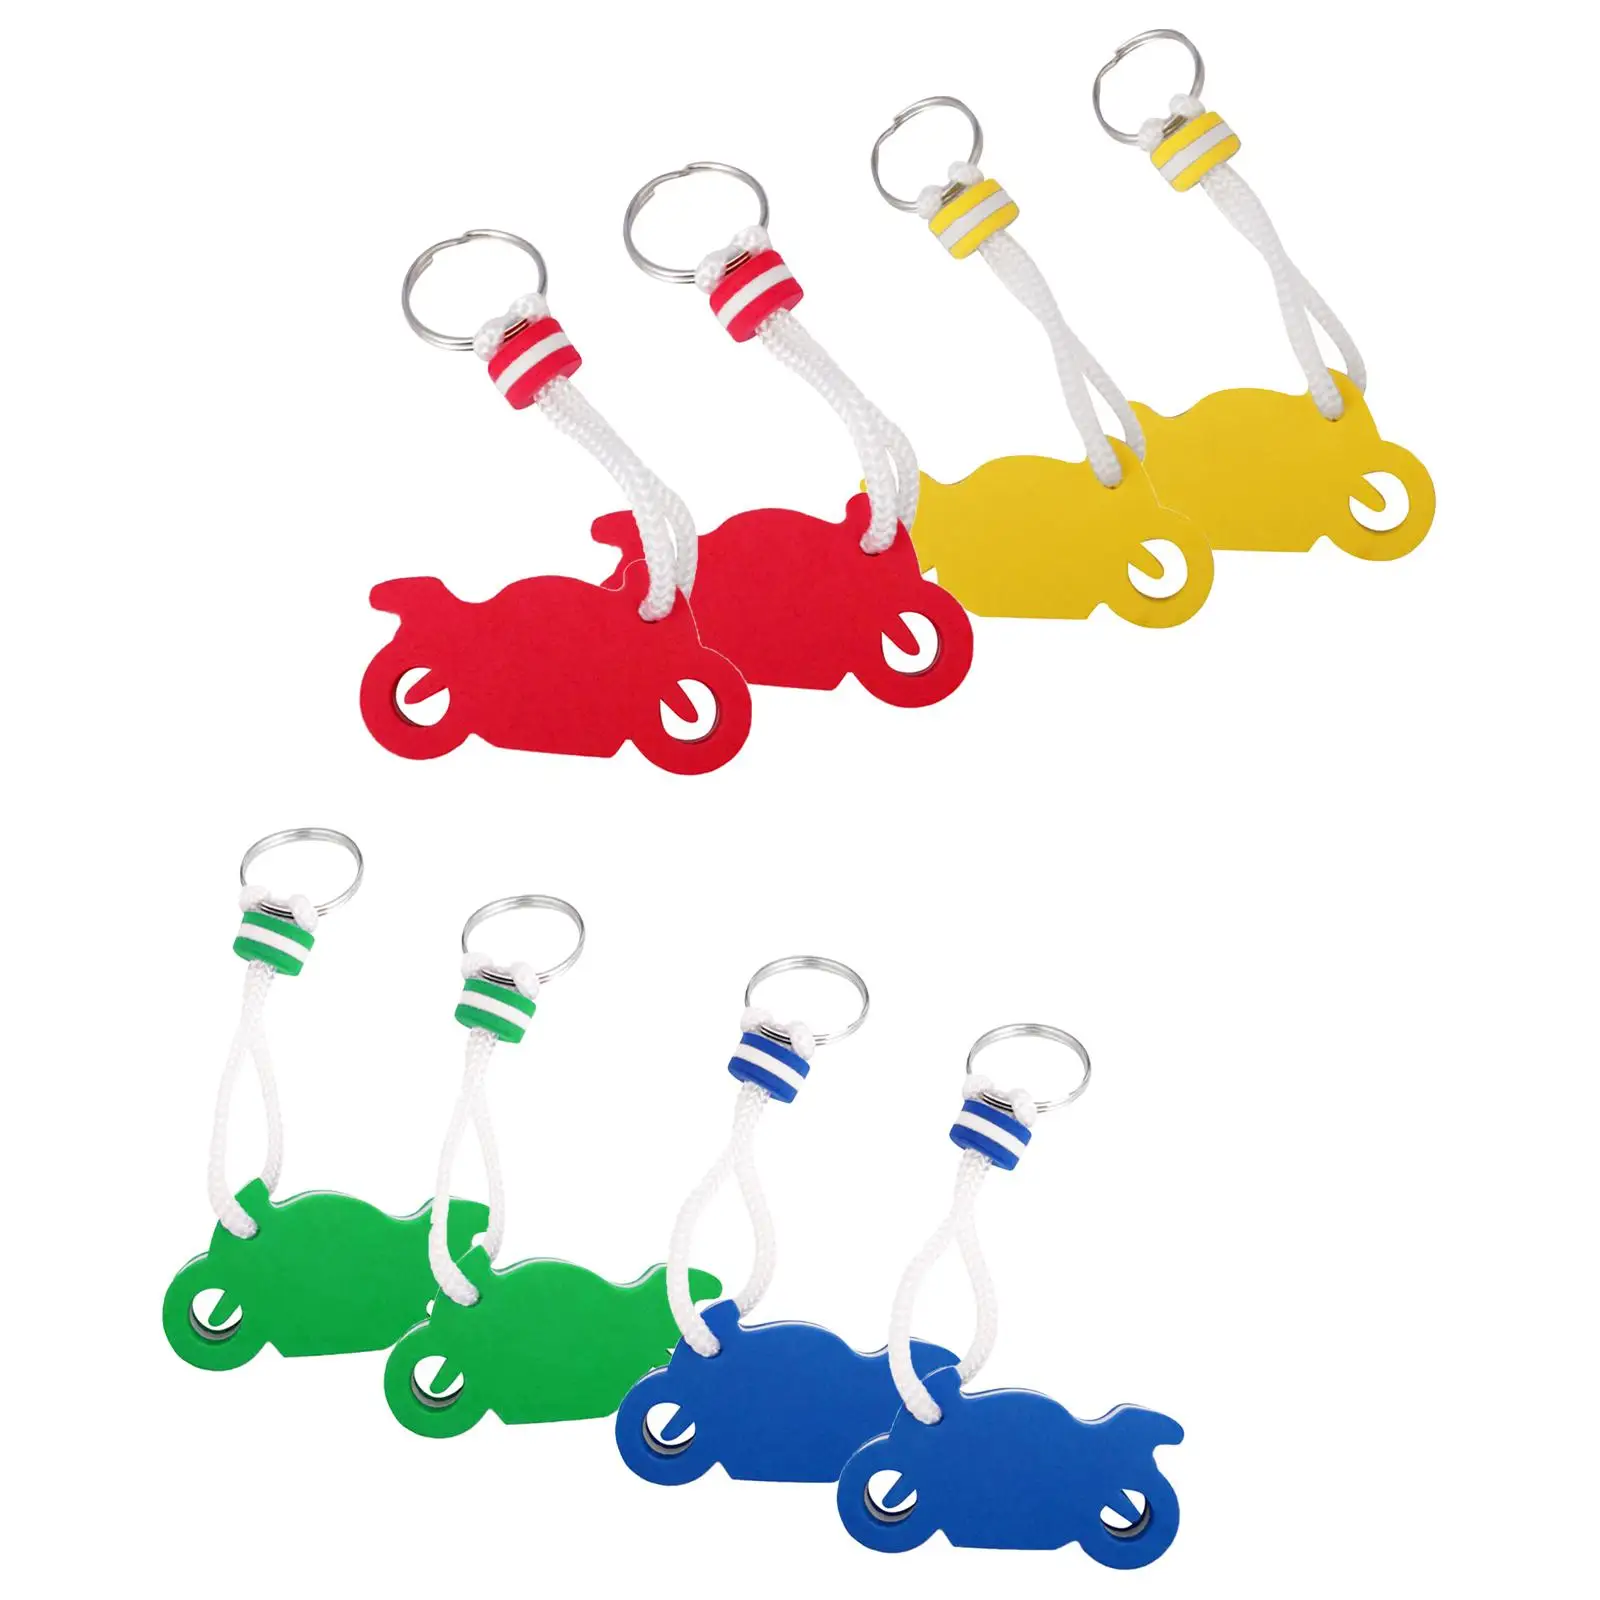 8x Lightweight Floating Motorcycle Keychain Float Buoyant  for Water Sports Canoe Sailing